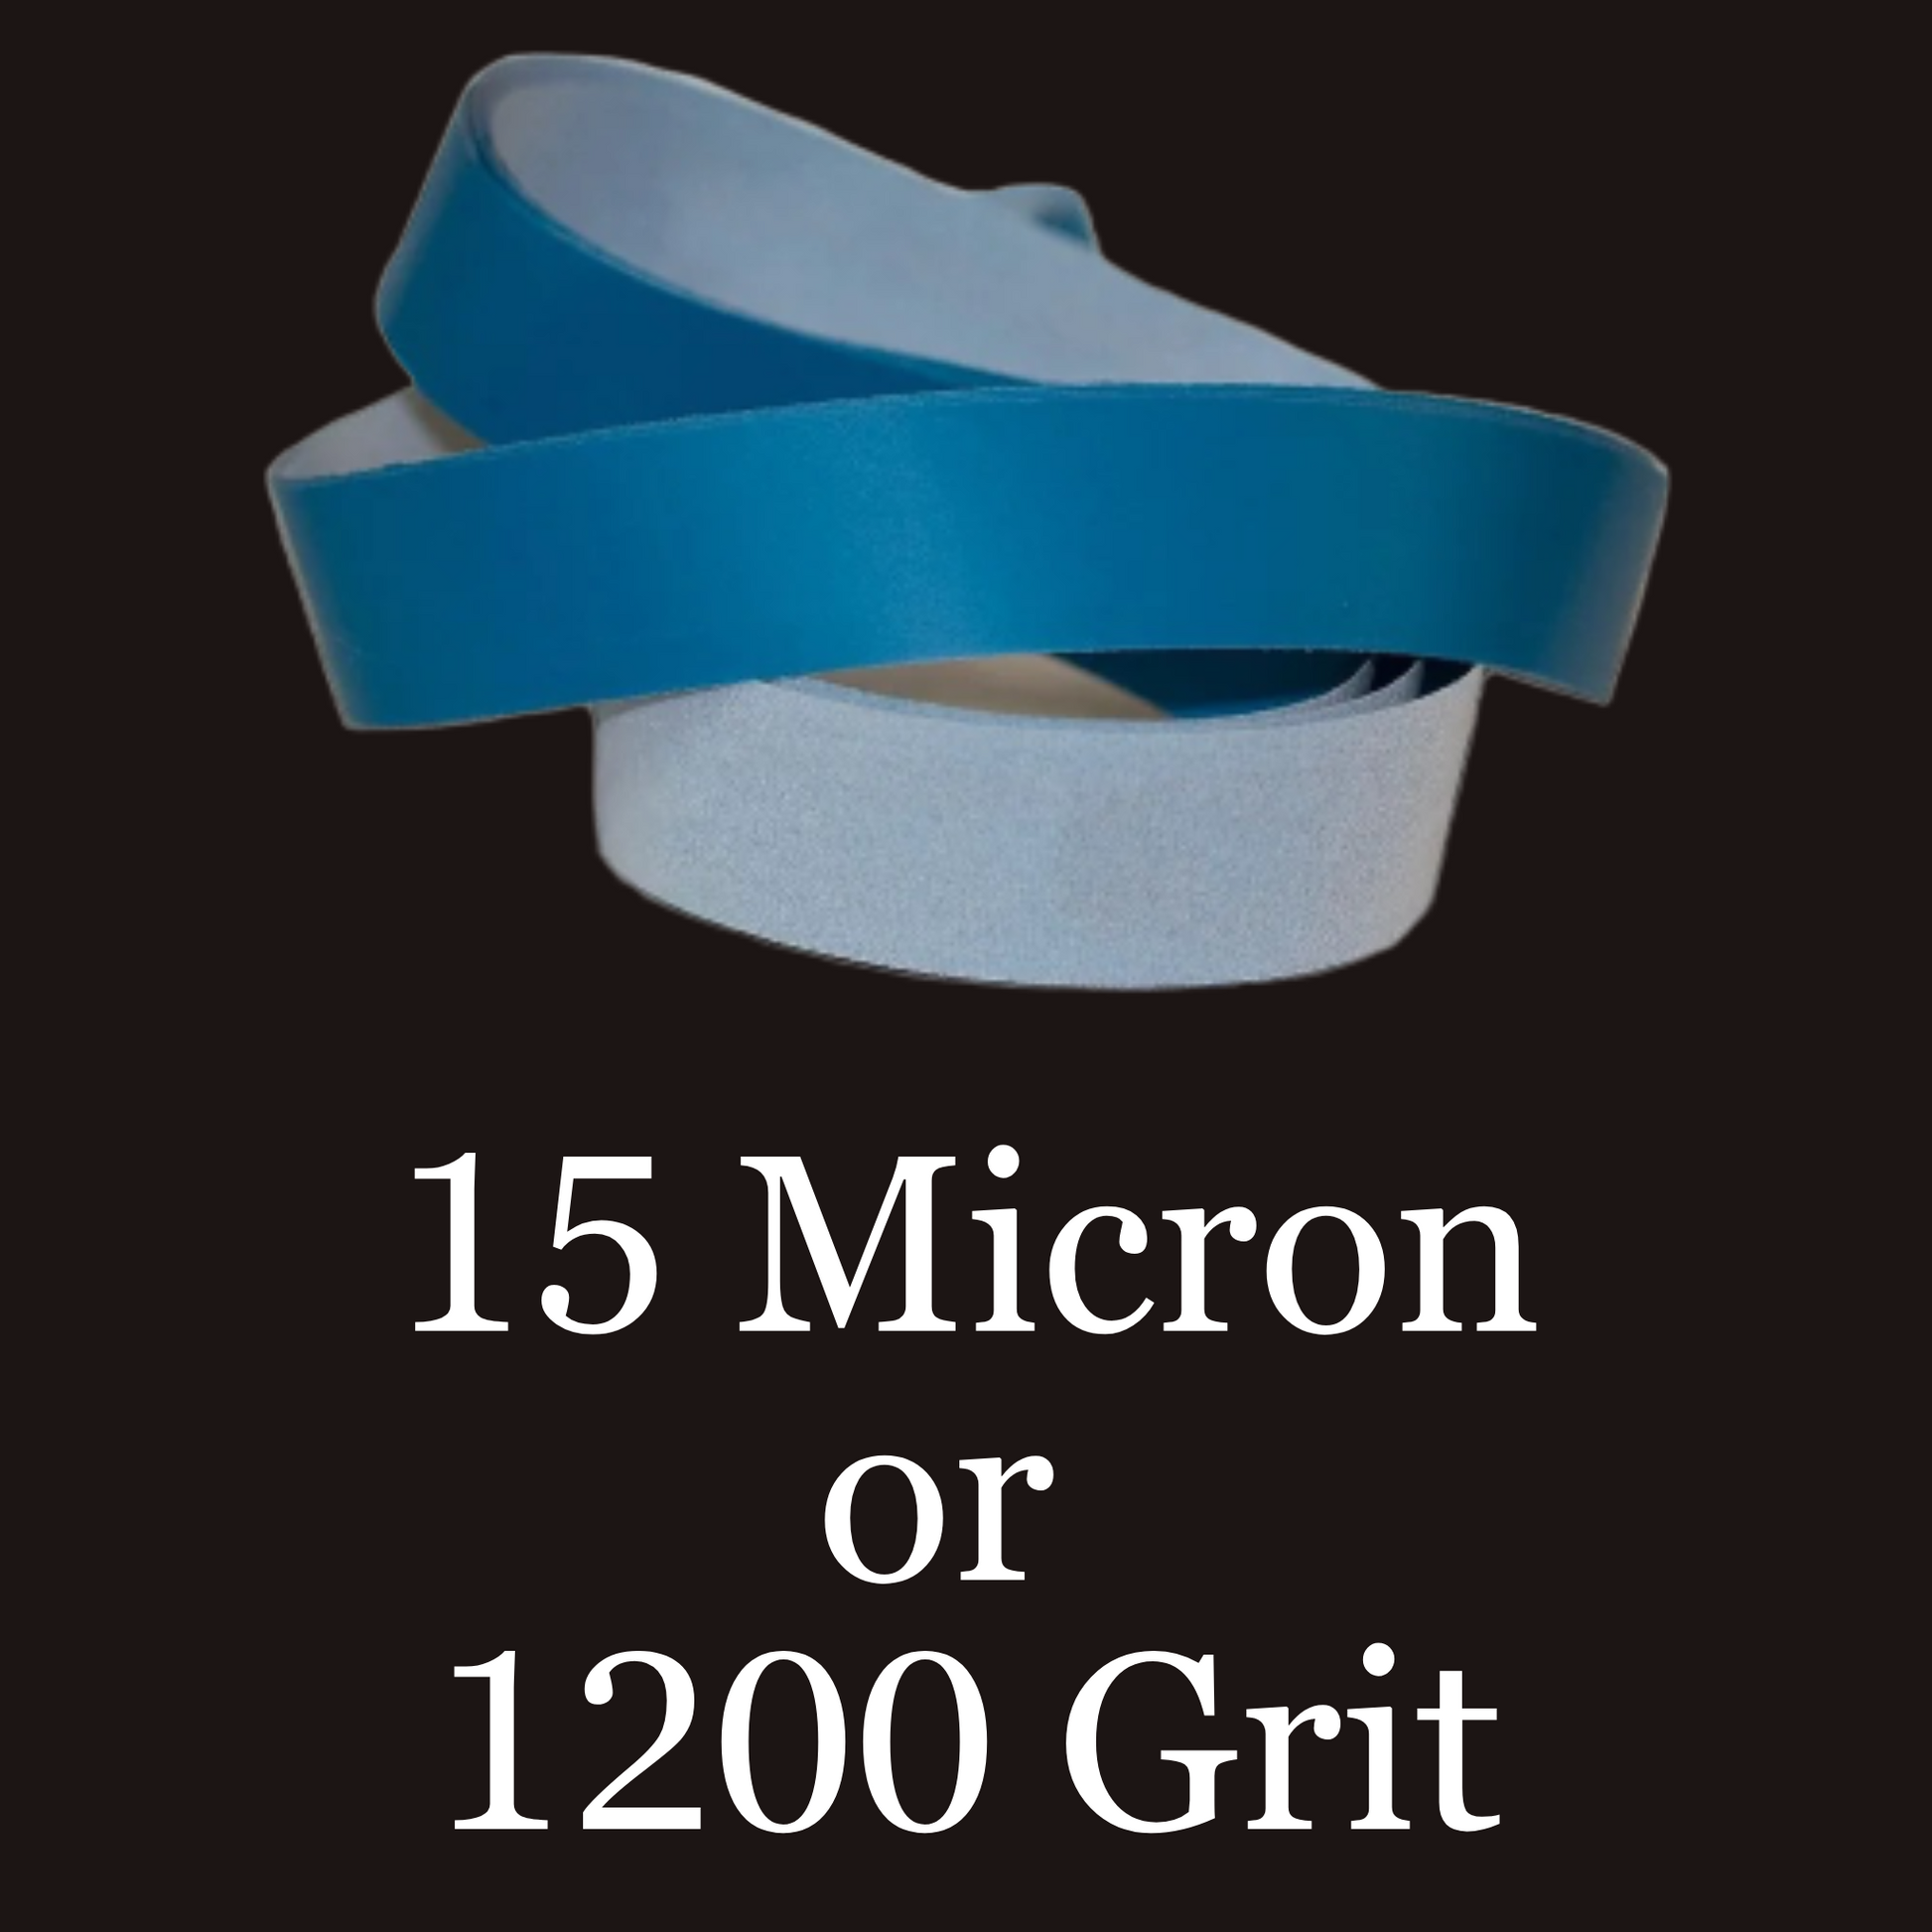 4” x 36” Film Micron Graded Finishing Belts 15 Micron or 1200 Grit